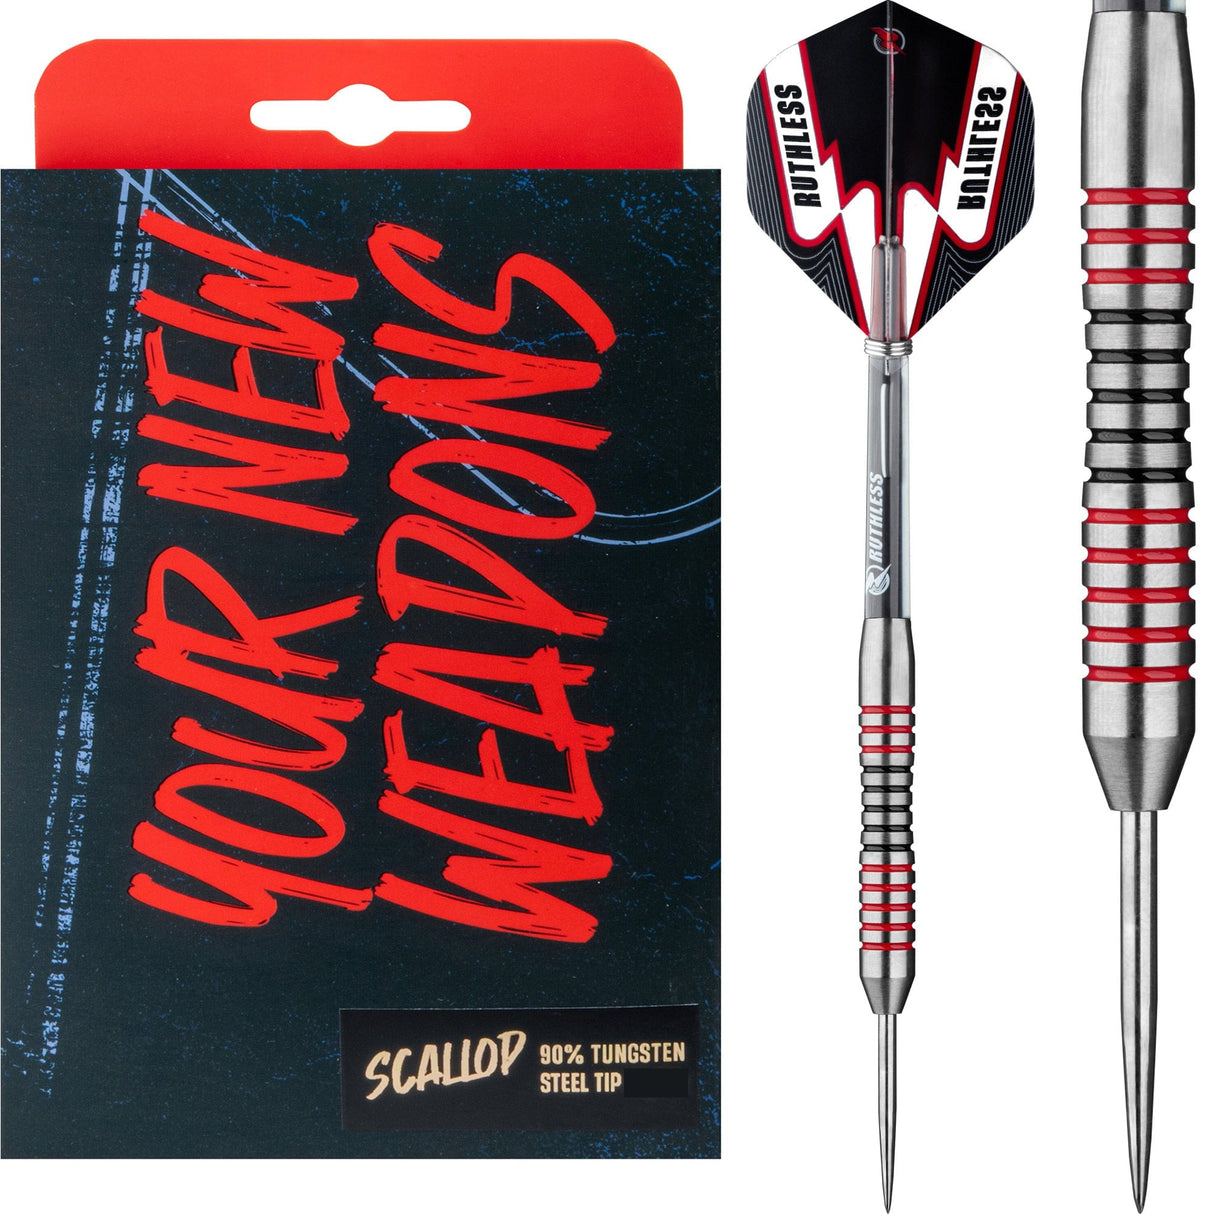 Ruthless Scallop Darts - Steel Tip - Ringed - Black & Red - 26g 26g